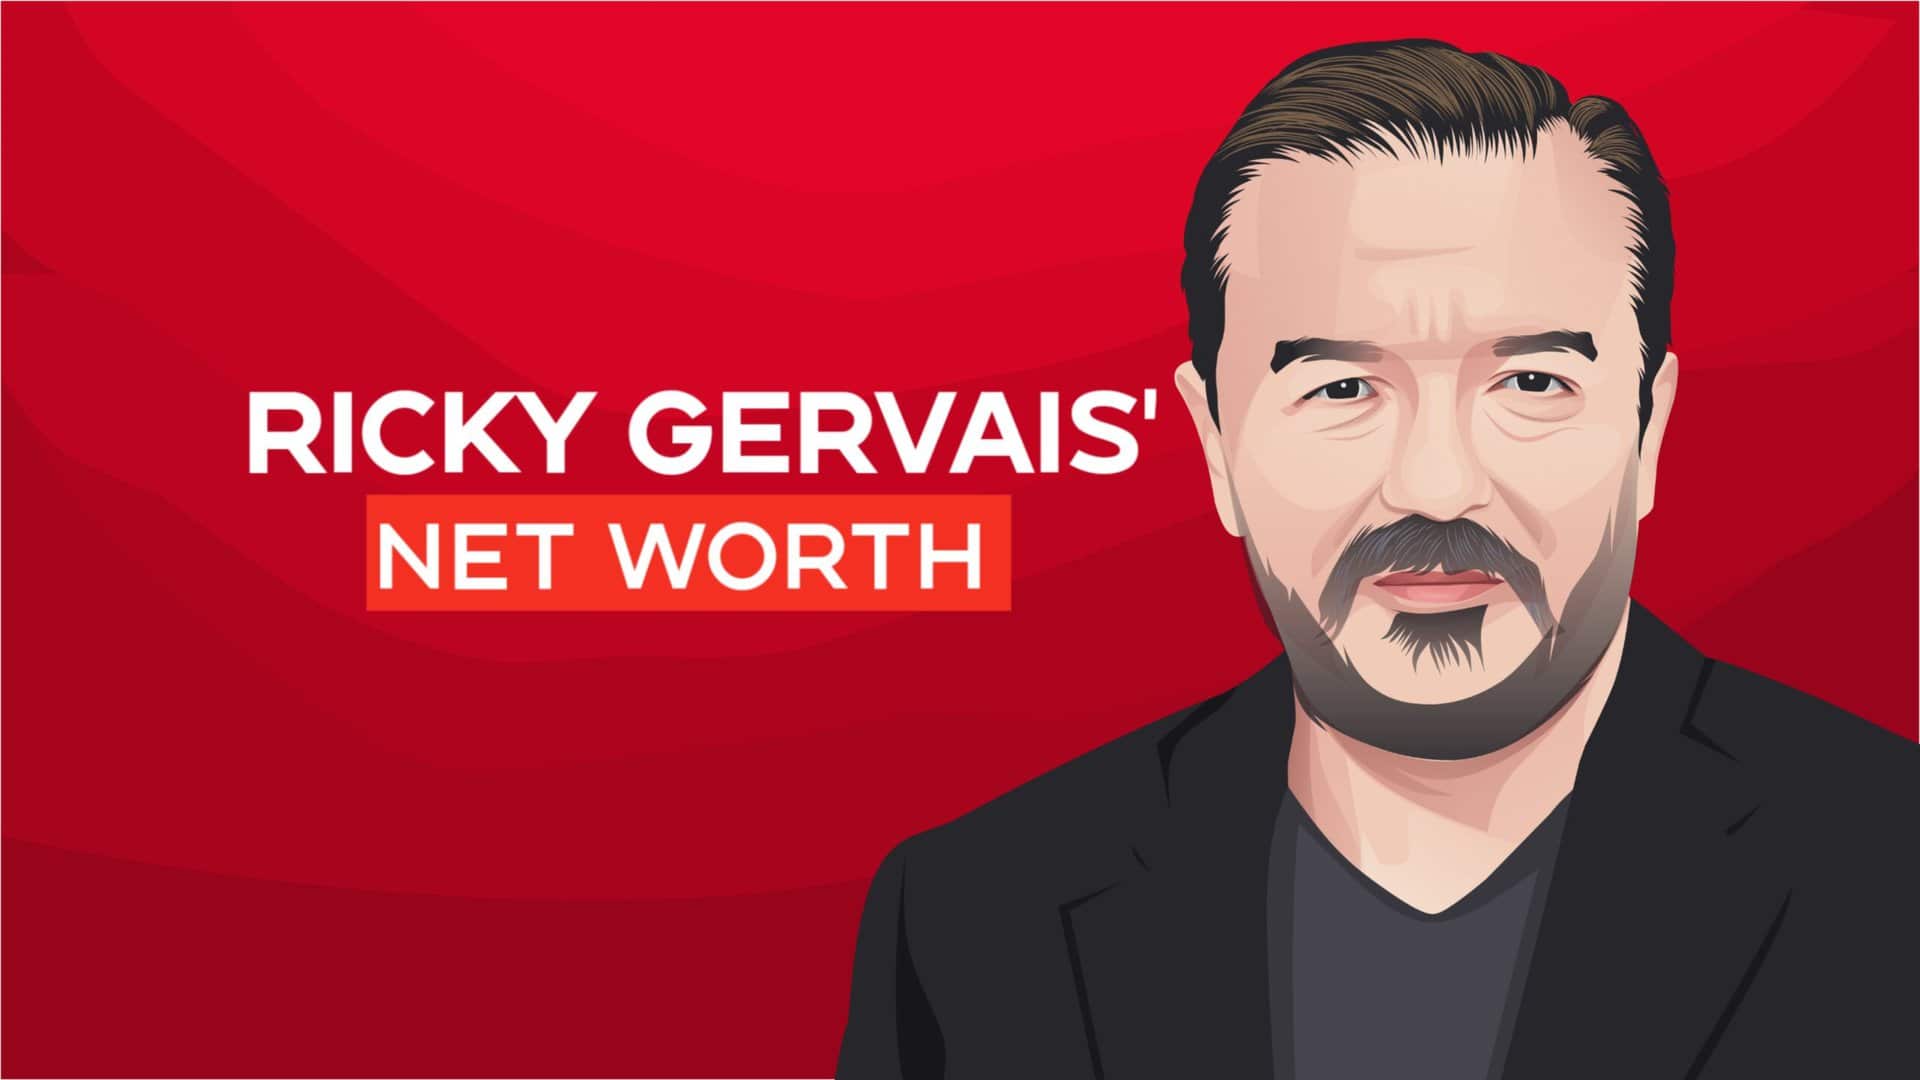 Ricky Gervais' Net Worth: How Rich Is the Creator of The Office?